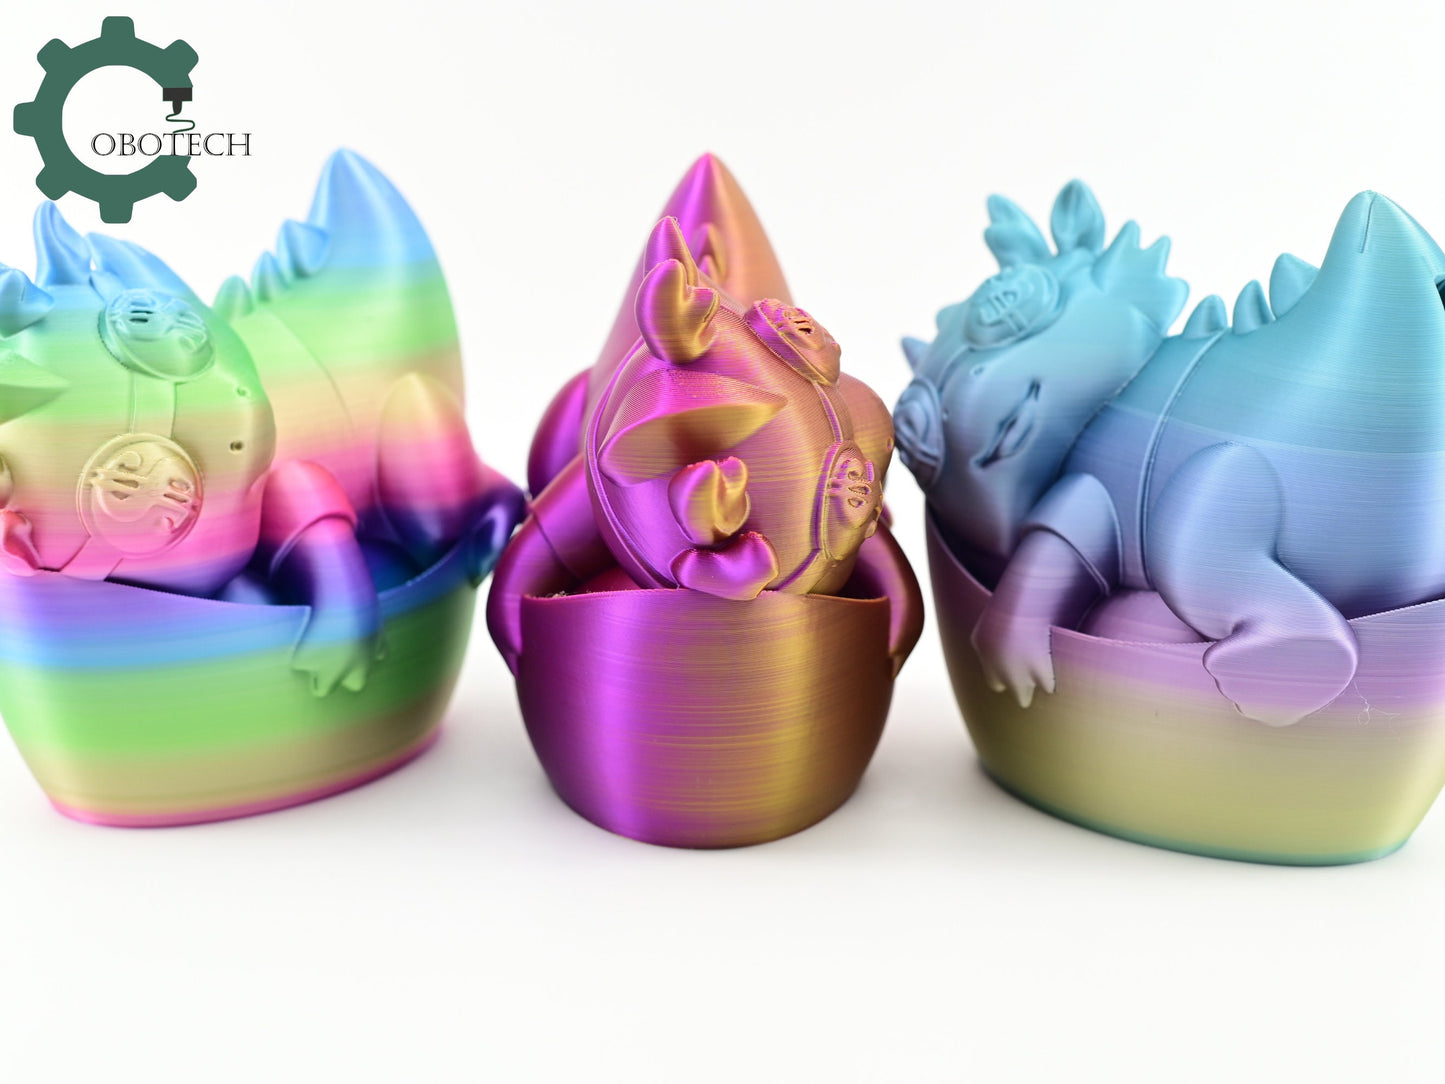 3D Printed Baby Dragon Piggy Bank by Cobotech, Lucky Dragon Piggy Bank Gifts, Desk/Home Decor, Cool Gift